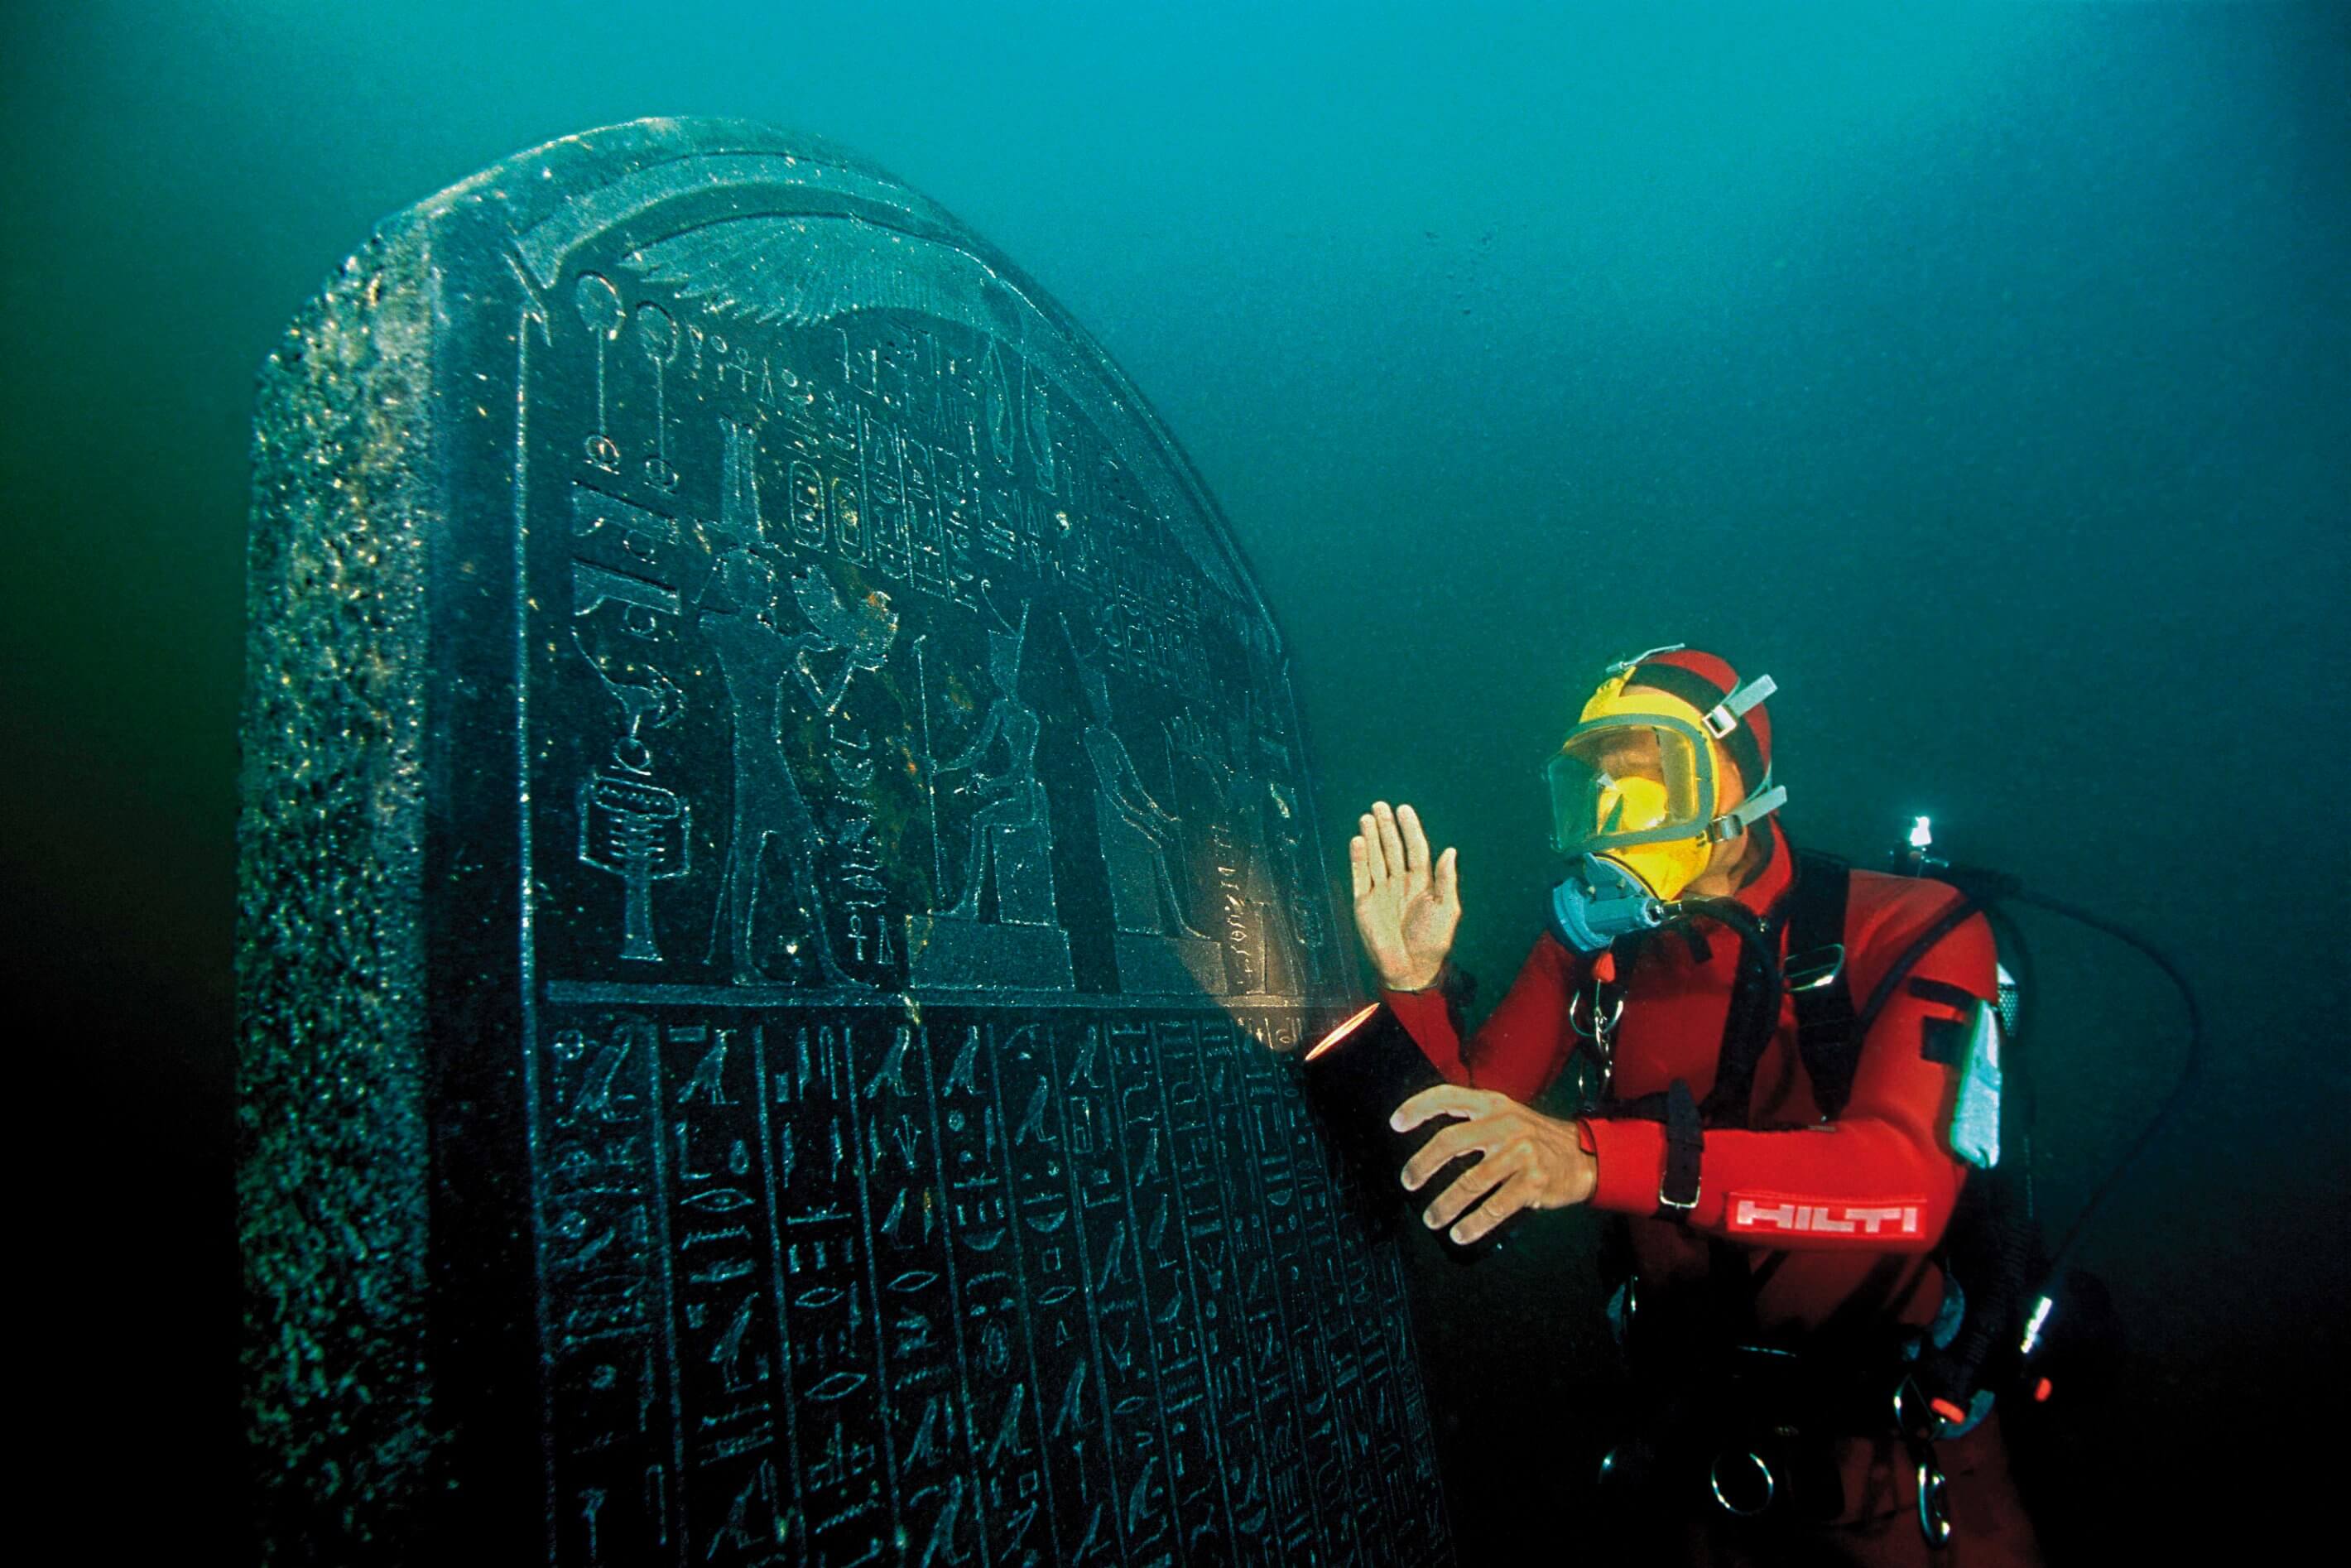 In Egypt found a sunken temple and the treasure ship